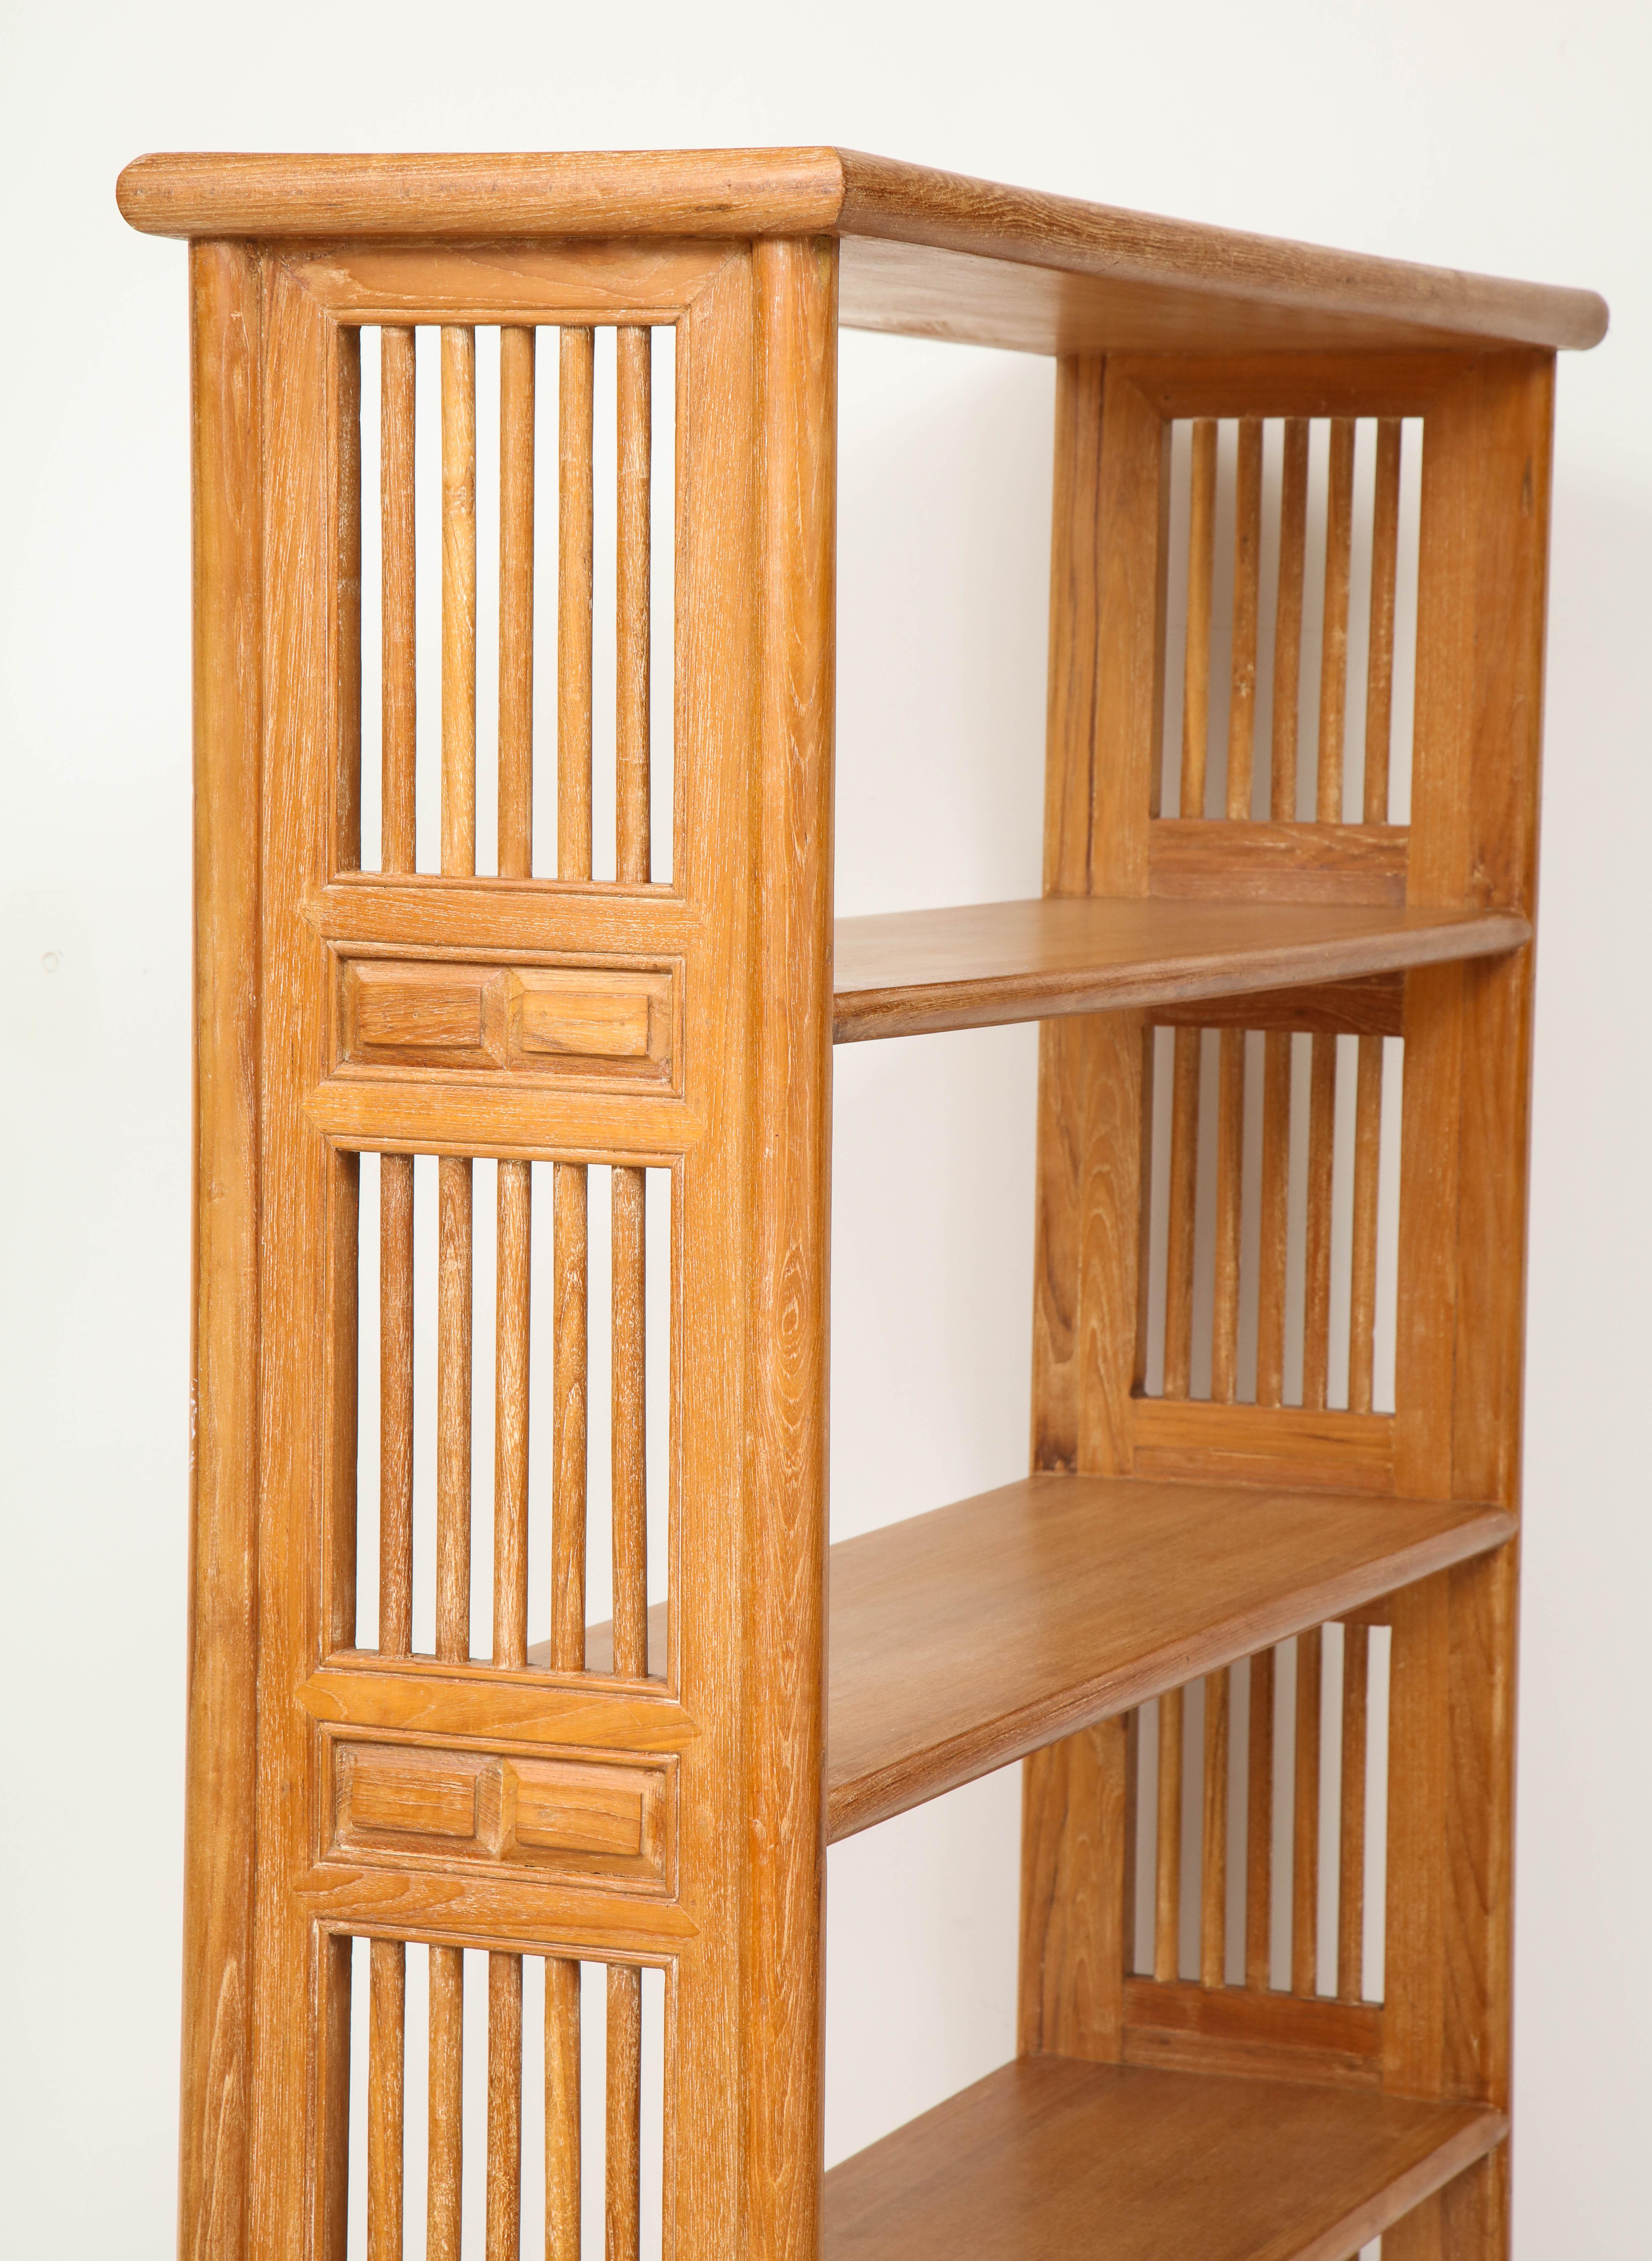 Pair of Cerused Oak Bookcases in the Vienna Secessionist Manner 1